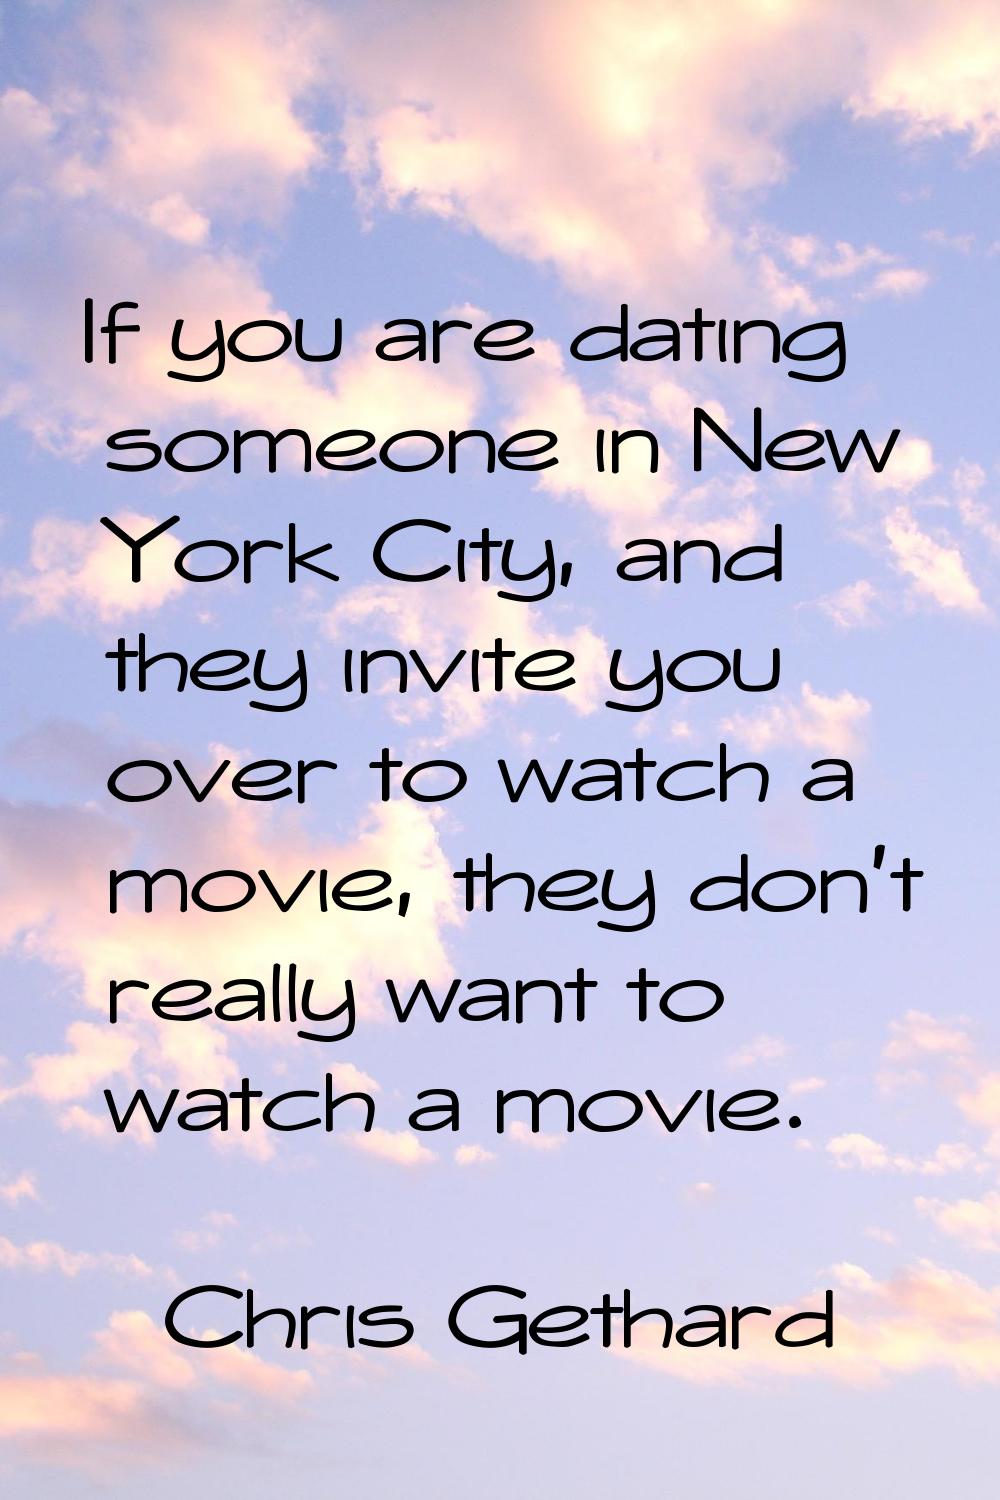 If you are dating someone in New York City, and they invite you over to watch a movie, they don't r